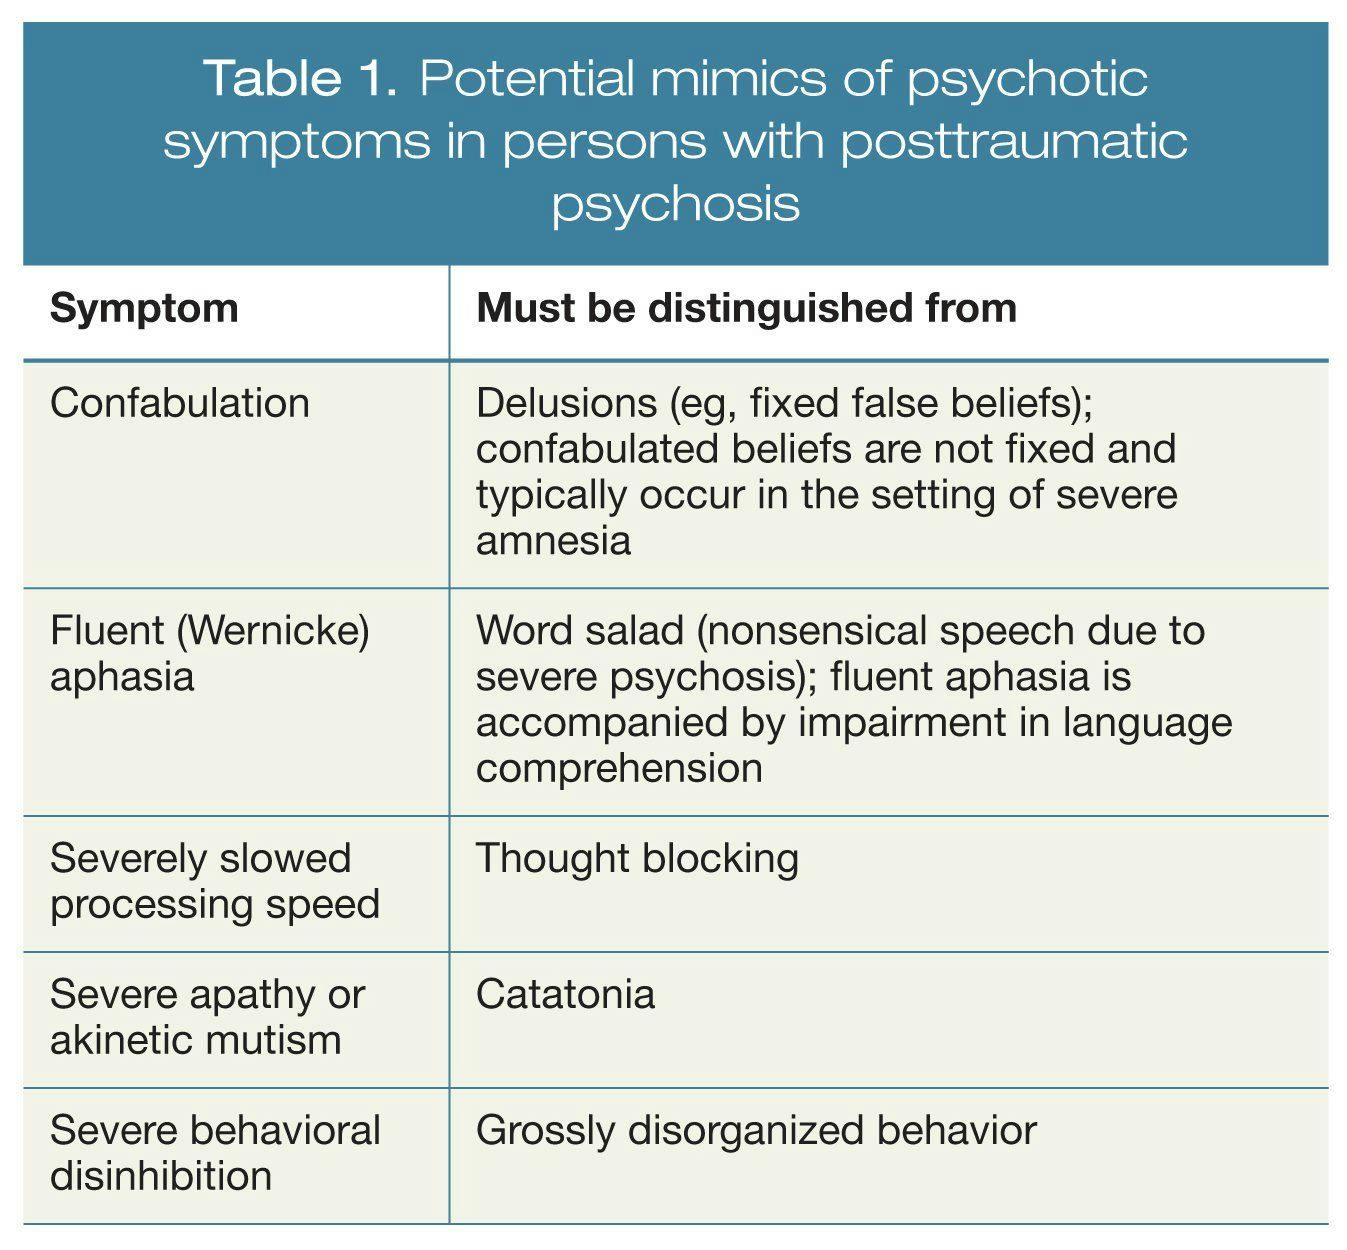 Potential mimics of psychotic symptoms in persons with posttraumatic psychosis